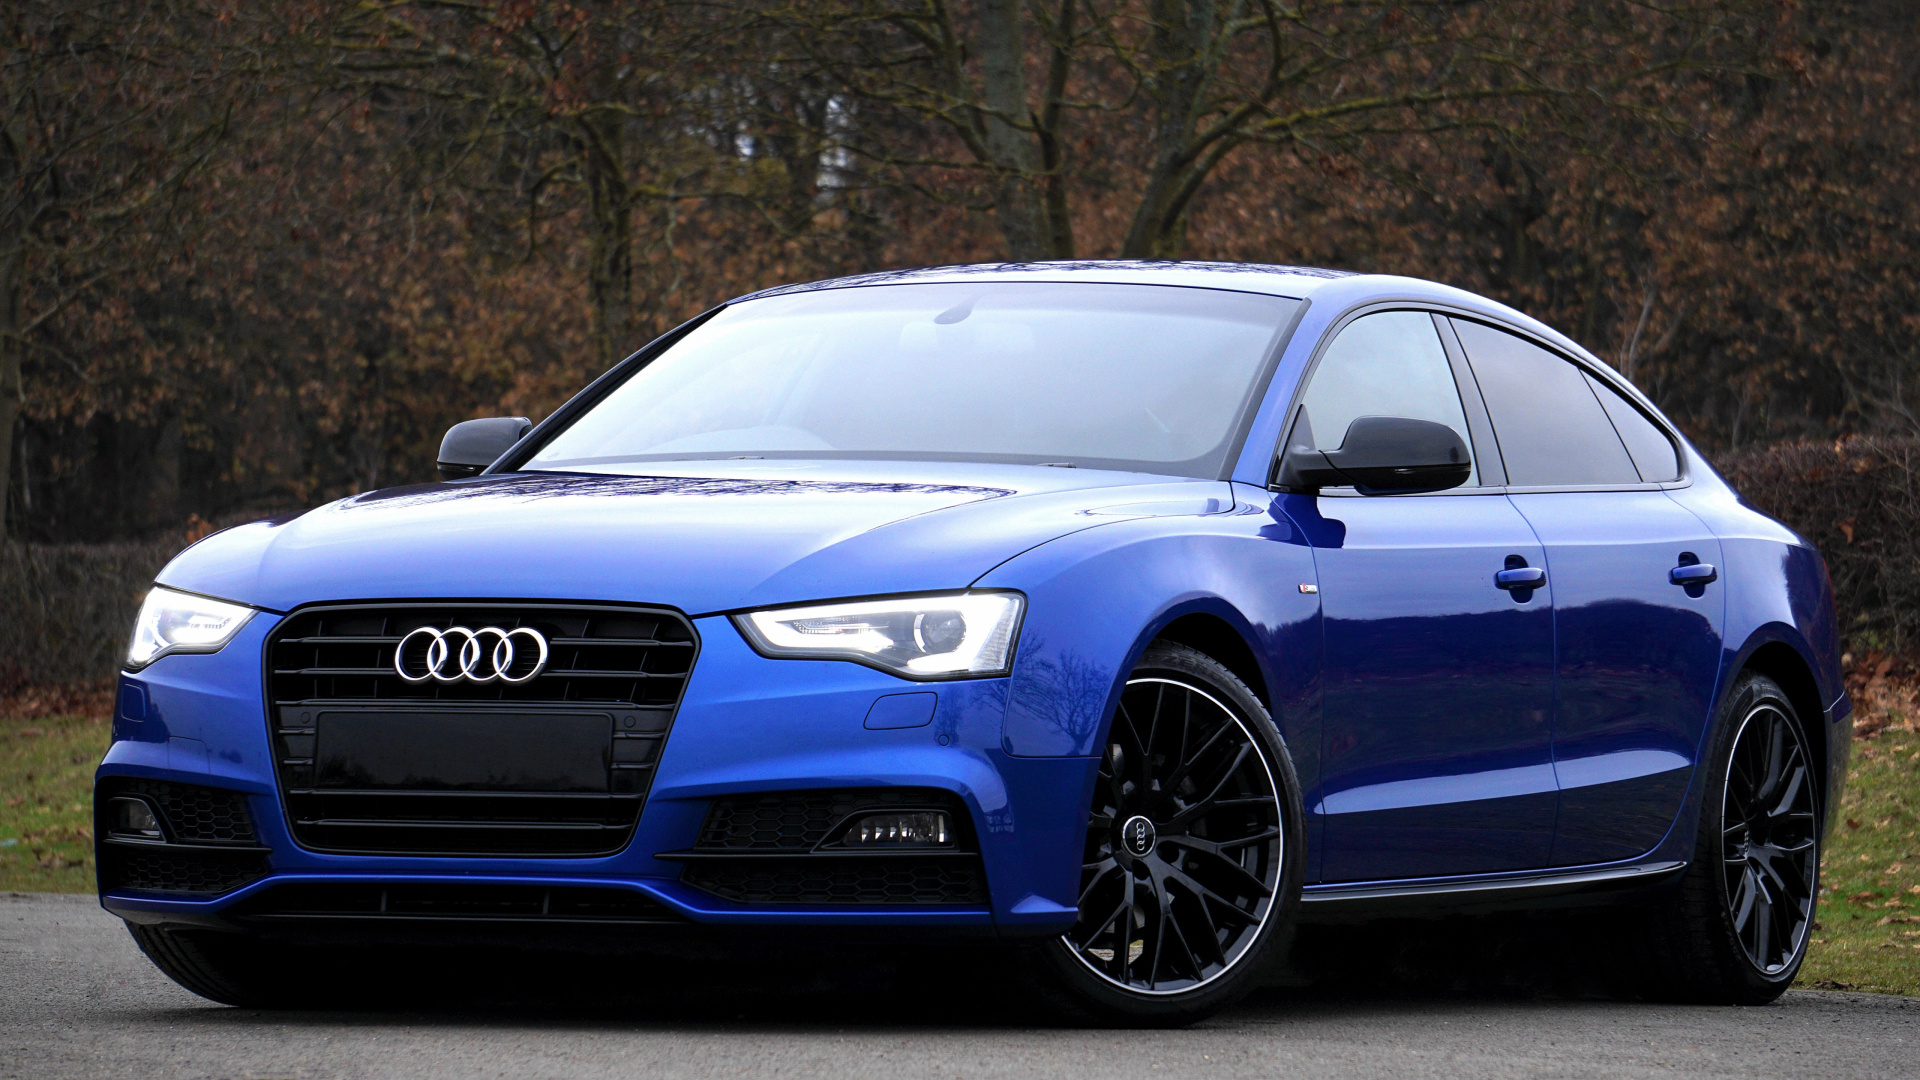 Blue Audi a 4 Coupe. Wallpaper in 1920x1080 Resolution